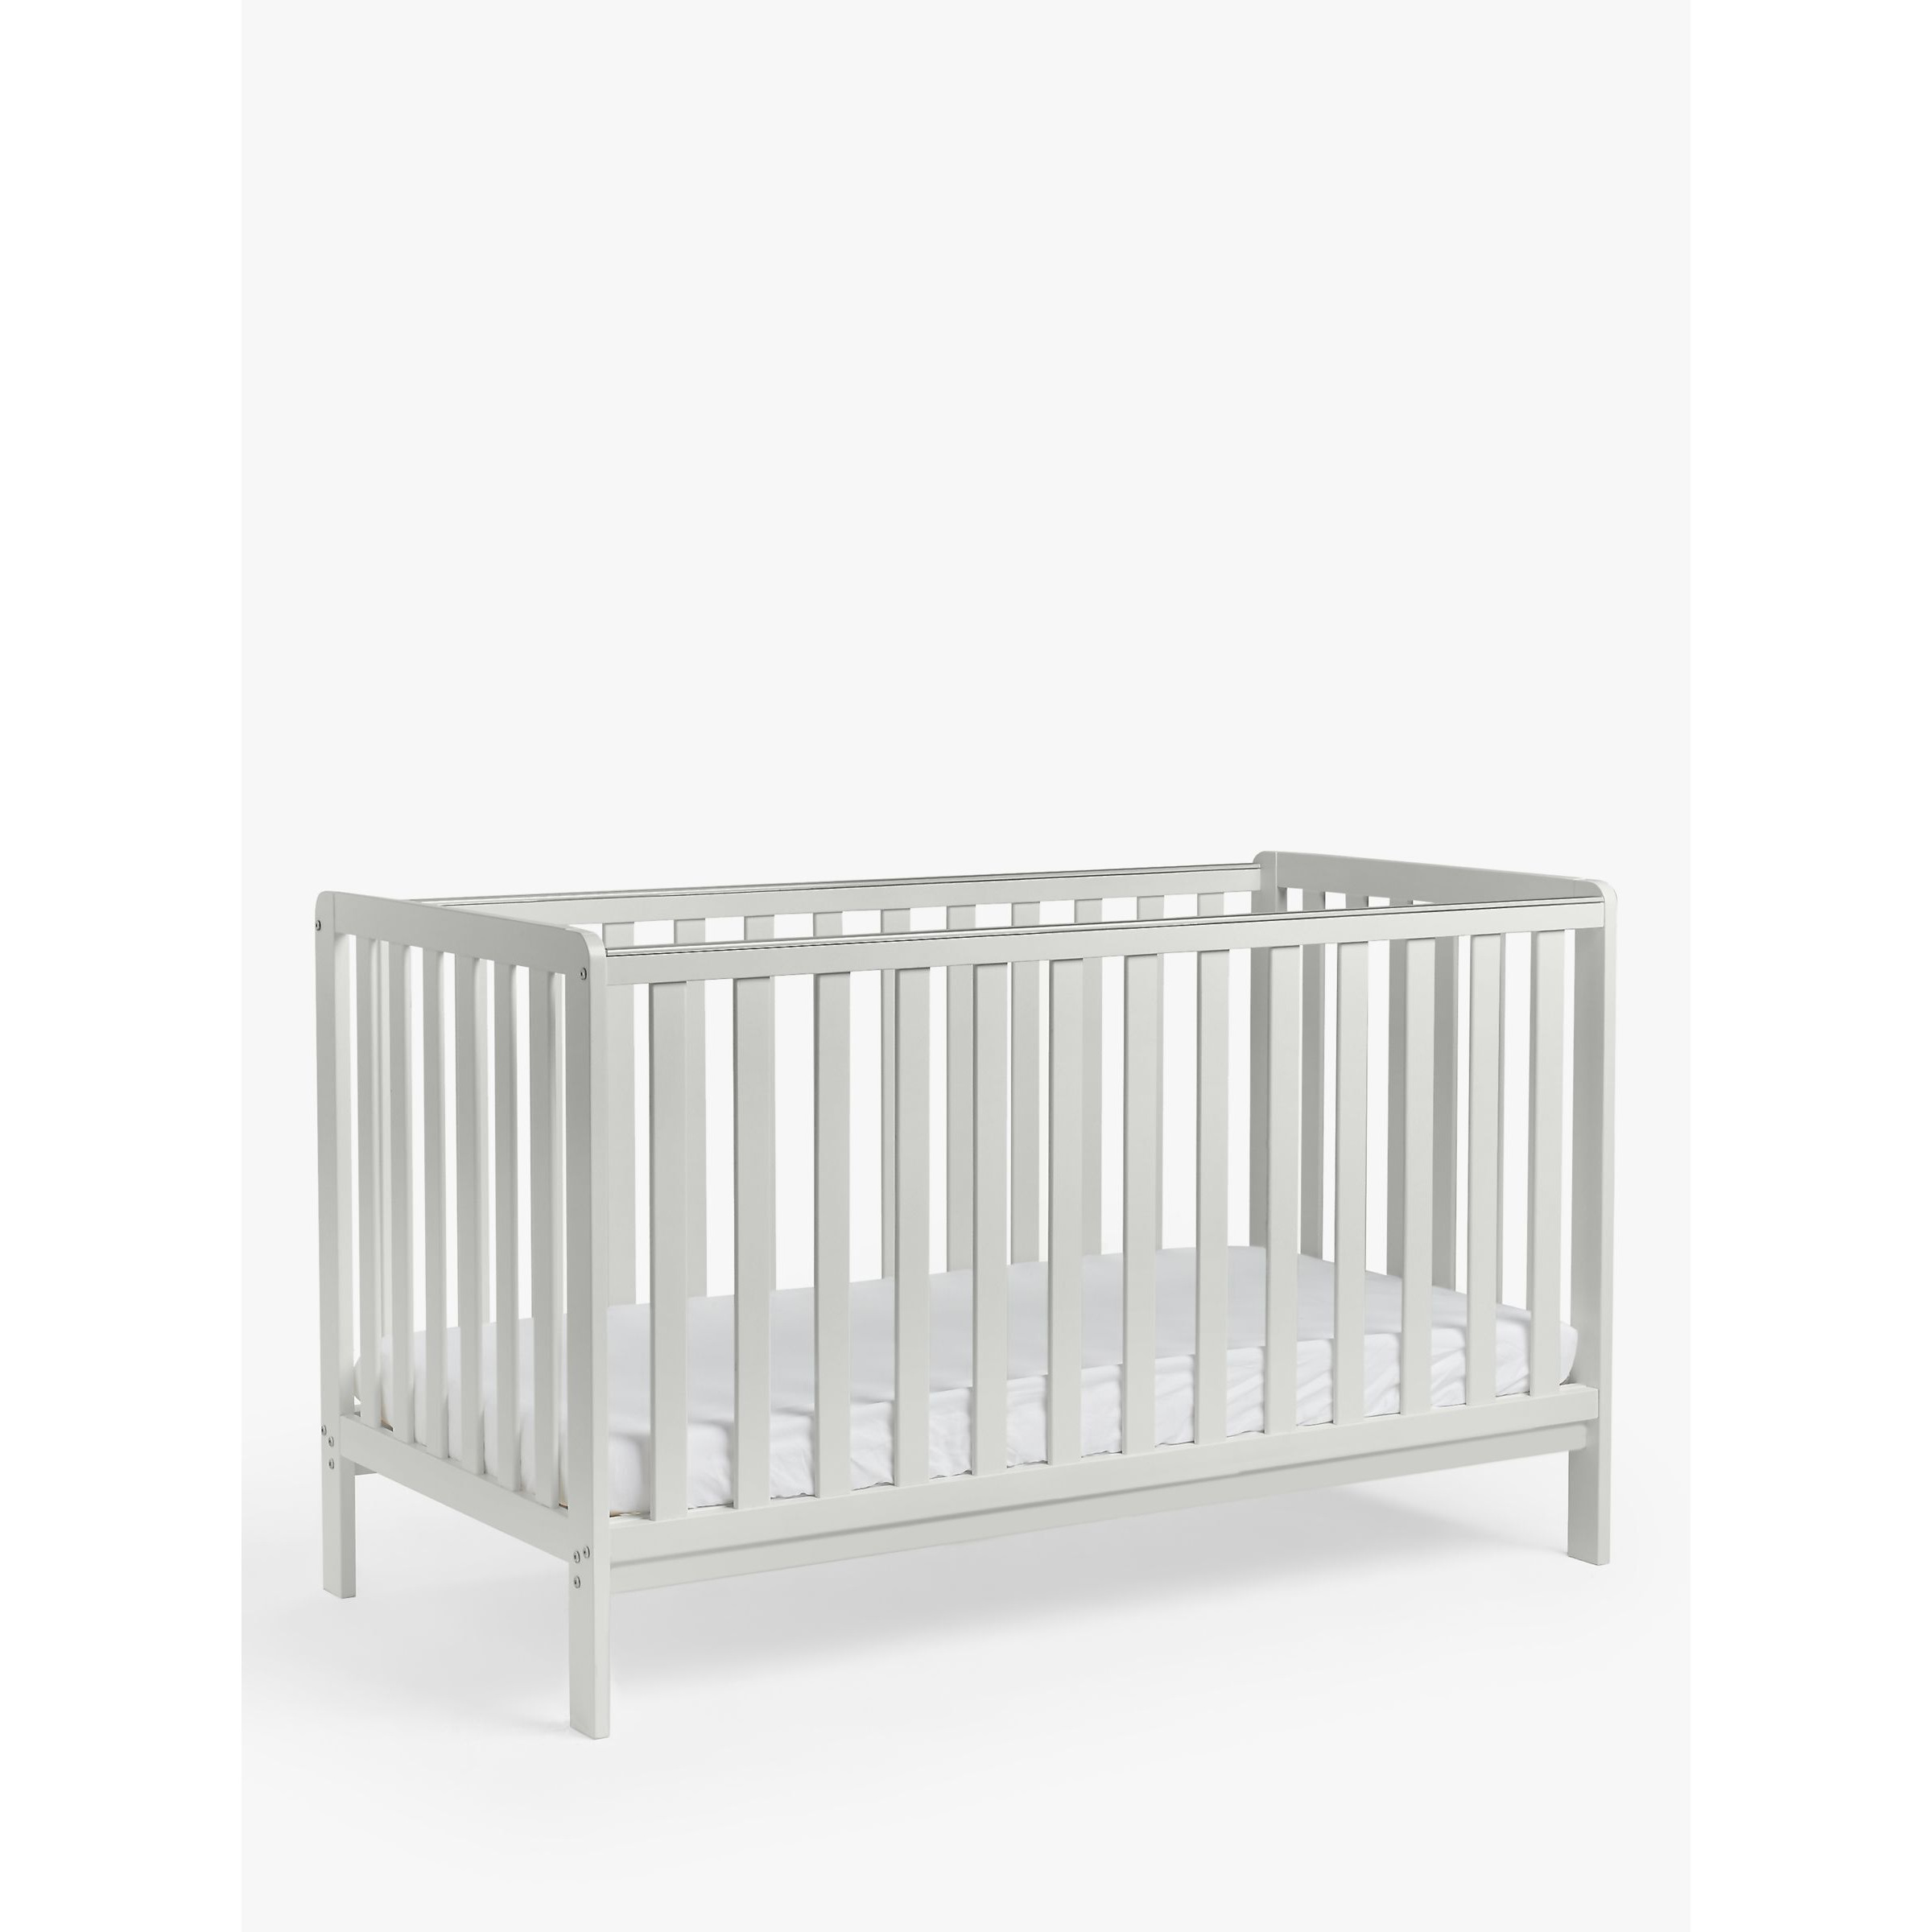 John Lewis ANYDAY Elementary Cot - image 1